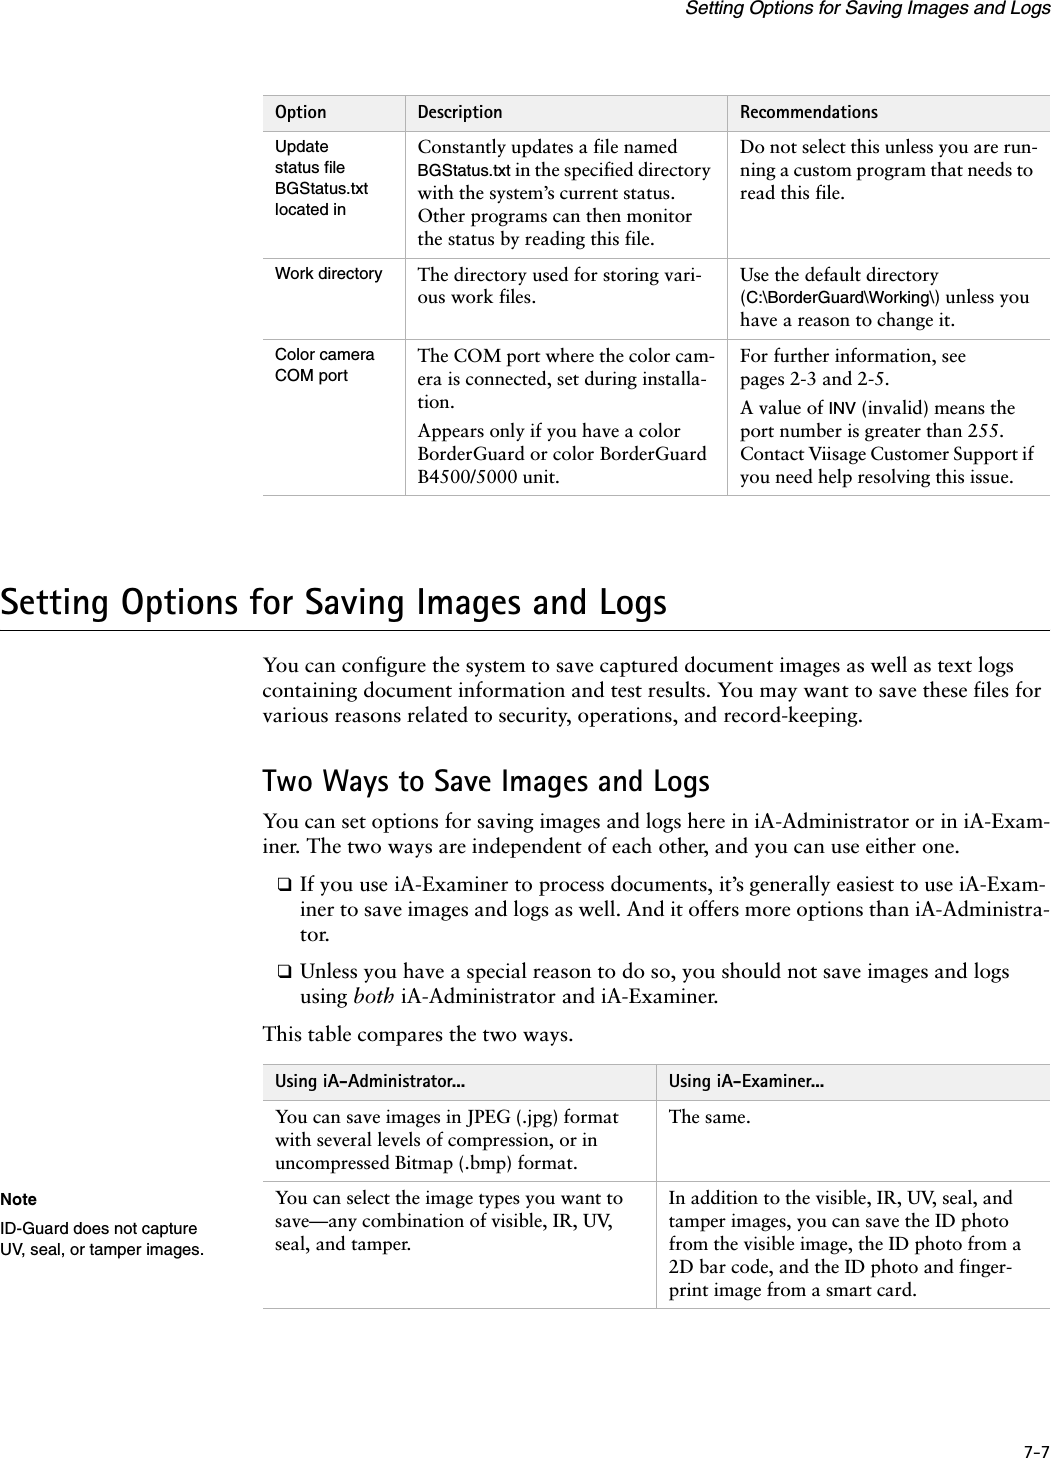 7-7Setting Options for Saving Images and LogsSetting Options for Saving Images and LogsYou can configure the system to save captured document images as well as text logs containing document information and test results. You may want to save these files for various reasons related to security, operations, and record-keeping.Two Ways to Save Images and LogsYou can set options for saving images and logs here in iA-Administrator or in iA-Exam-iner. The two ways are independent of each other, and you can use either one.❑If you use iA-Examiner to process documents, it’s generally easiest to use iA-Exam-iner to save images and logs as well. And it offers more options than iA-Administra-tor.❑Unless you have a special reason to do so, you should not save images and logs using both iA-Administrator and iA-Examiner.This table compares the two ways.Update status file BGStatus.txt located inConstantly updates a file named BGStatus.txt in the specified directory with the system’s current status. Other programs can then monitor the status by reading this file.Do not select this unless you are run-ning a custom program that needs to read this file.Work directory The directory used for storing vari-ous work files.Use the default directory (C:\BorderGuard\Working\) unless you have a reason to change it.Color camera COM portThe COM port where the color cam-era is connected, set during installa-tion.Appears only if you have a color BorderGuard or color BorderGuard B4500/5000 unit.For further information, see pages 2-3 and 2-5.A value of INV (invalid) means the port number is greater than 255. Contact Viisage Customer Support if you need help resolving this issue.Option Description RecommendationsUsing iA-Administrator... Using iA-Examiner...You can save images in JPEG (.jpg) format with several levels of compression, or in uncompressed Bitmap (.bmp) format.The same.You can select the image types you want to save—any combination of visible, IR, UV, seal, and tamper.In addition to the visible, IR, UV, seal, and tamper images, you can save the ID photo from the visible image, the ID photo from a 2D bar code, and the ID photo and finger-print image from a smart card.NoteID-Guard does not capture UV, seal, or tamper images.